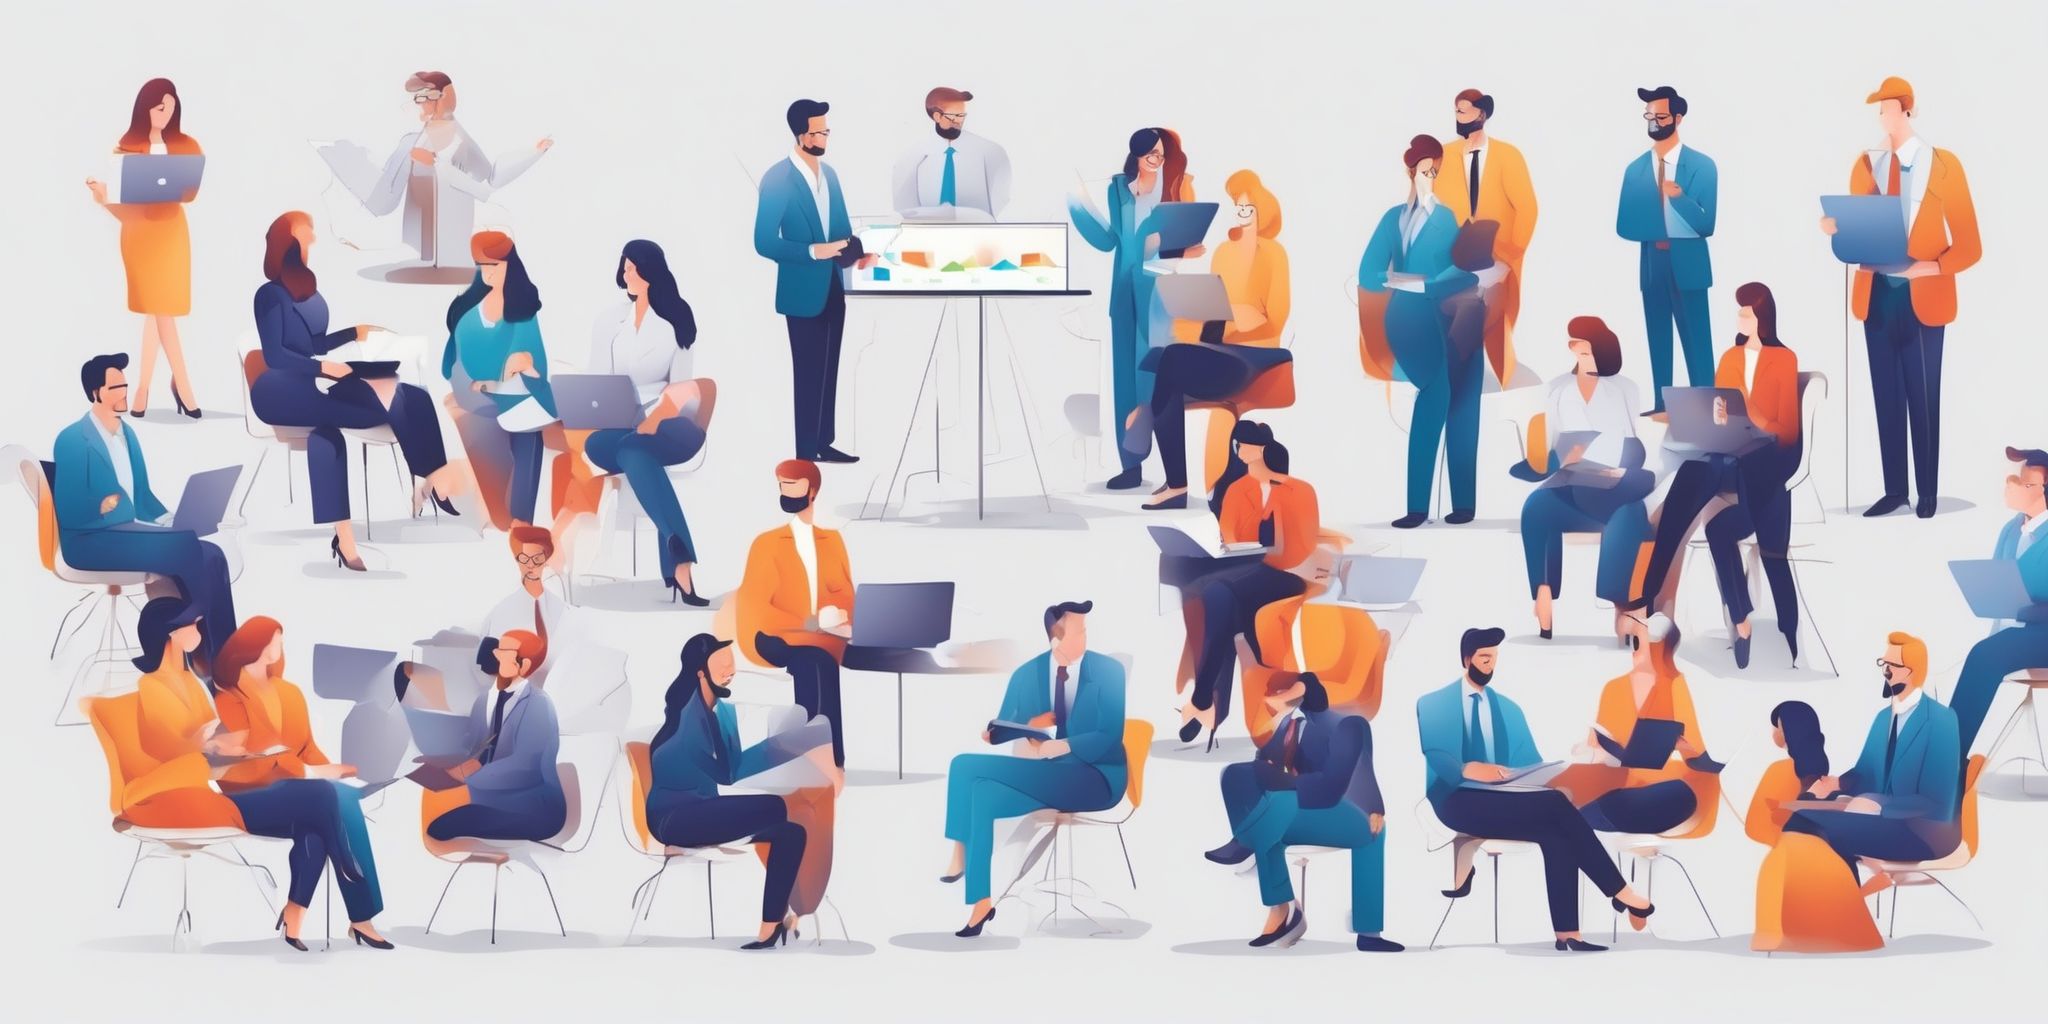 Networking experts in illustration style with gradients and white background